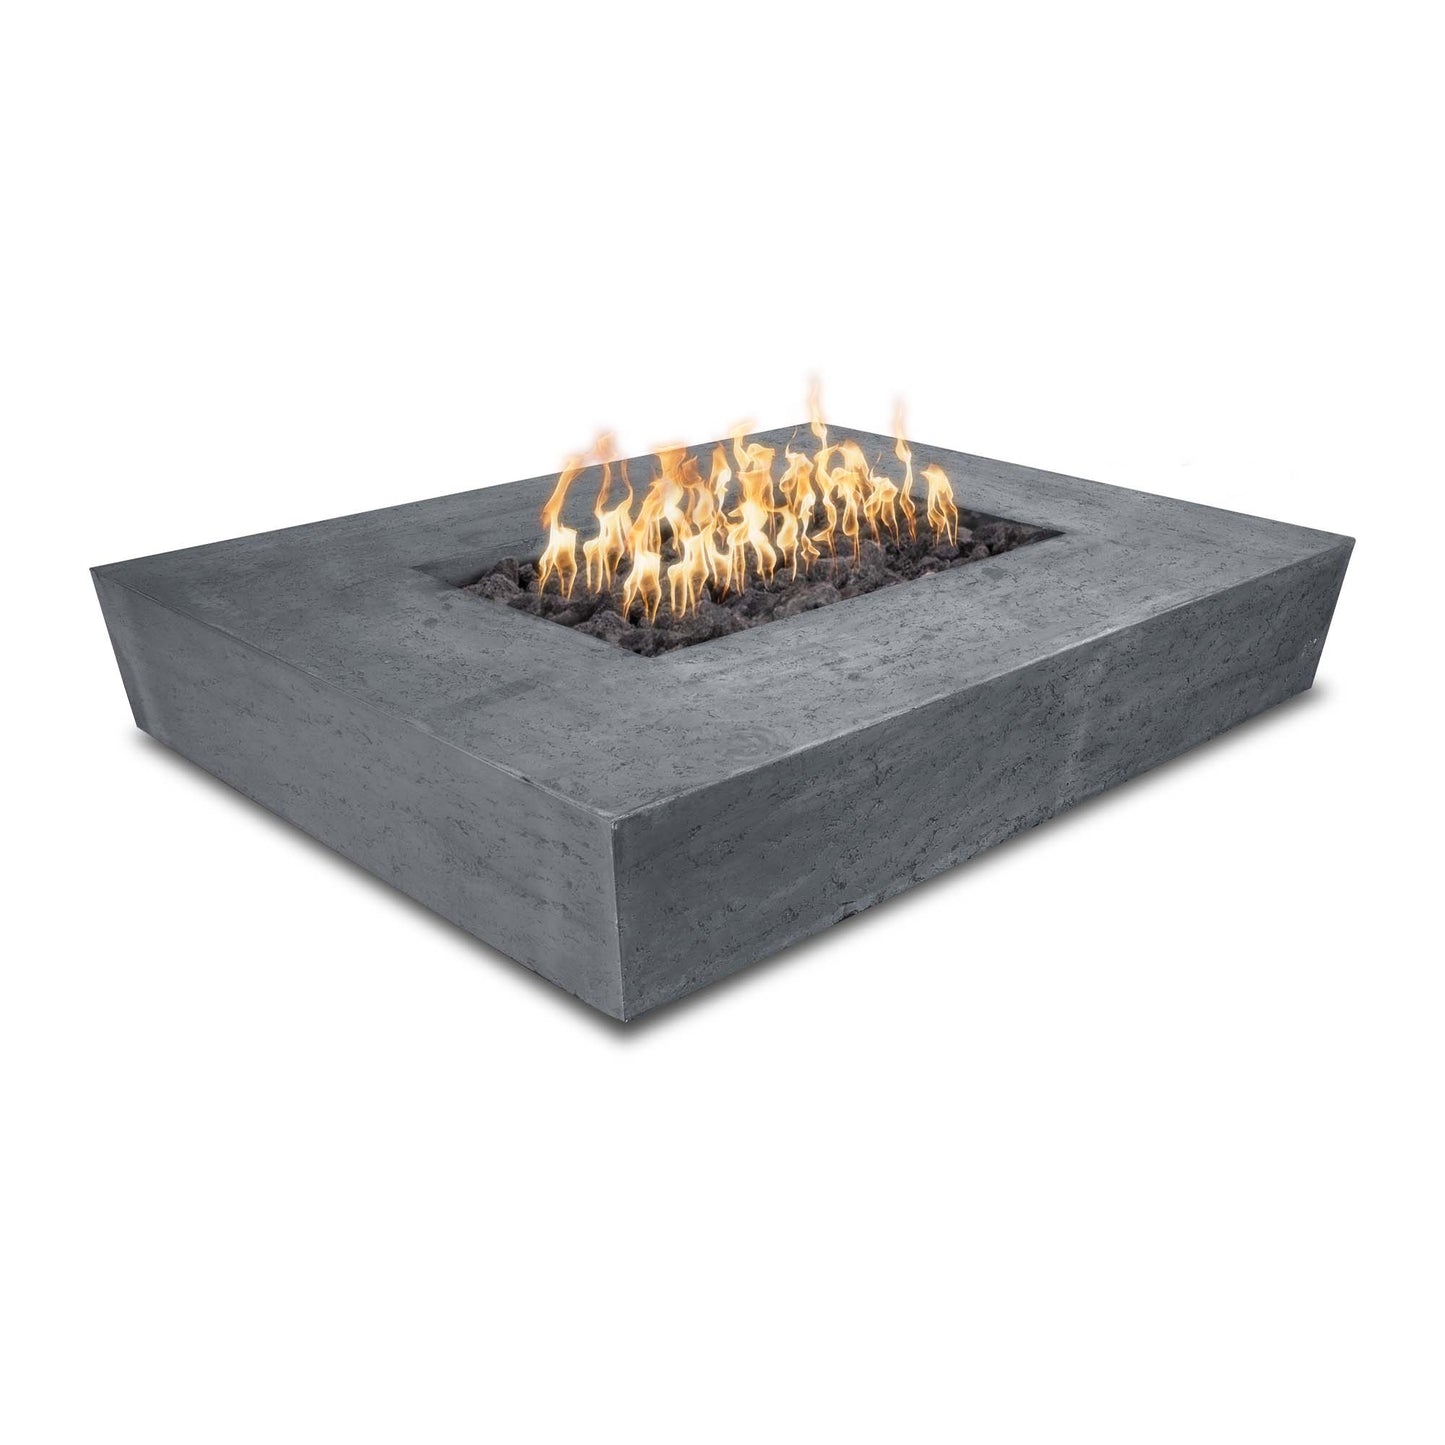 The Outdoor Plus Rectangular Heiko 58" Rustic Coffee GFRC Concrete Natural Gas Fire Pit with Flame Sense with Spark Ignition